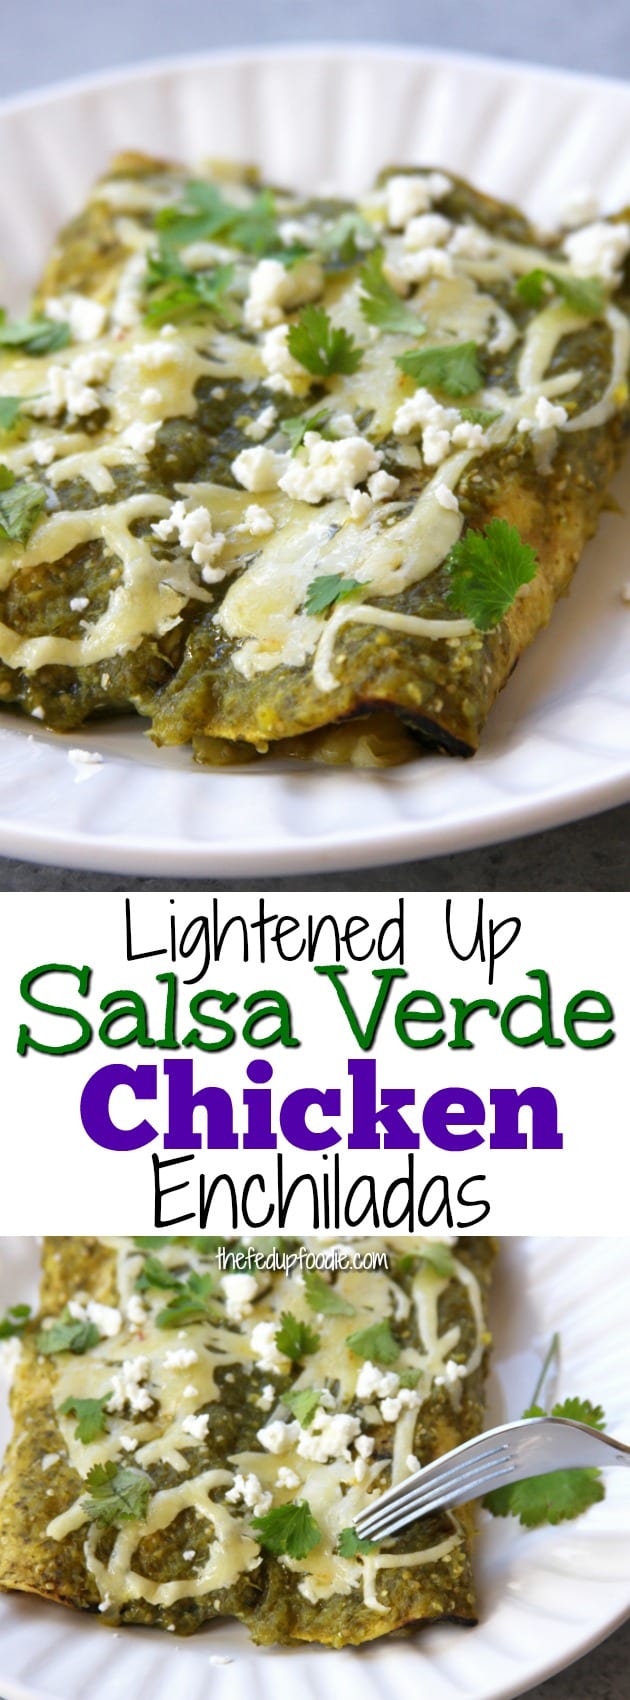 Lightened Up Salsa Verde Chicken Enchiladas recipe is an absolute family favorite but lower in calories than your traditional enchilada. It has the creaminess and decadence of Mexican cheese along with the refreshing flavors of tomatillos and cilantro. Absolute comfort food with out the guilt. #thefedupfoodie #homemadeenchiladas #salsaverde #greenenchiladas https://www.thefedupfoodie.com